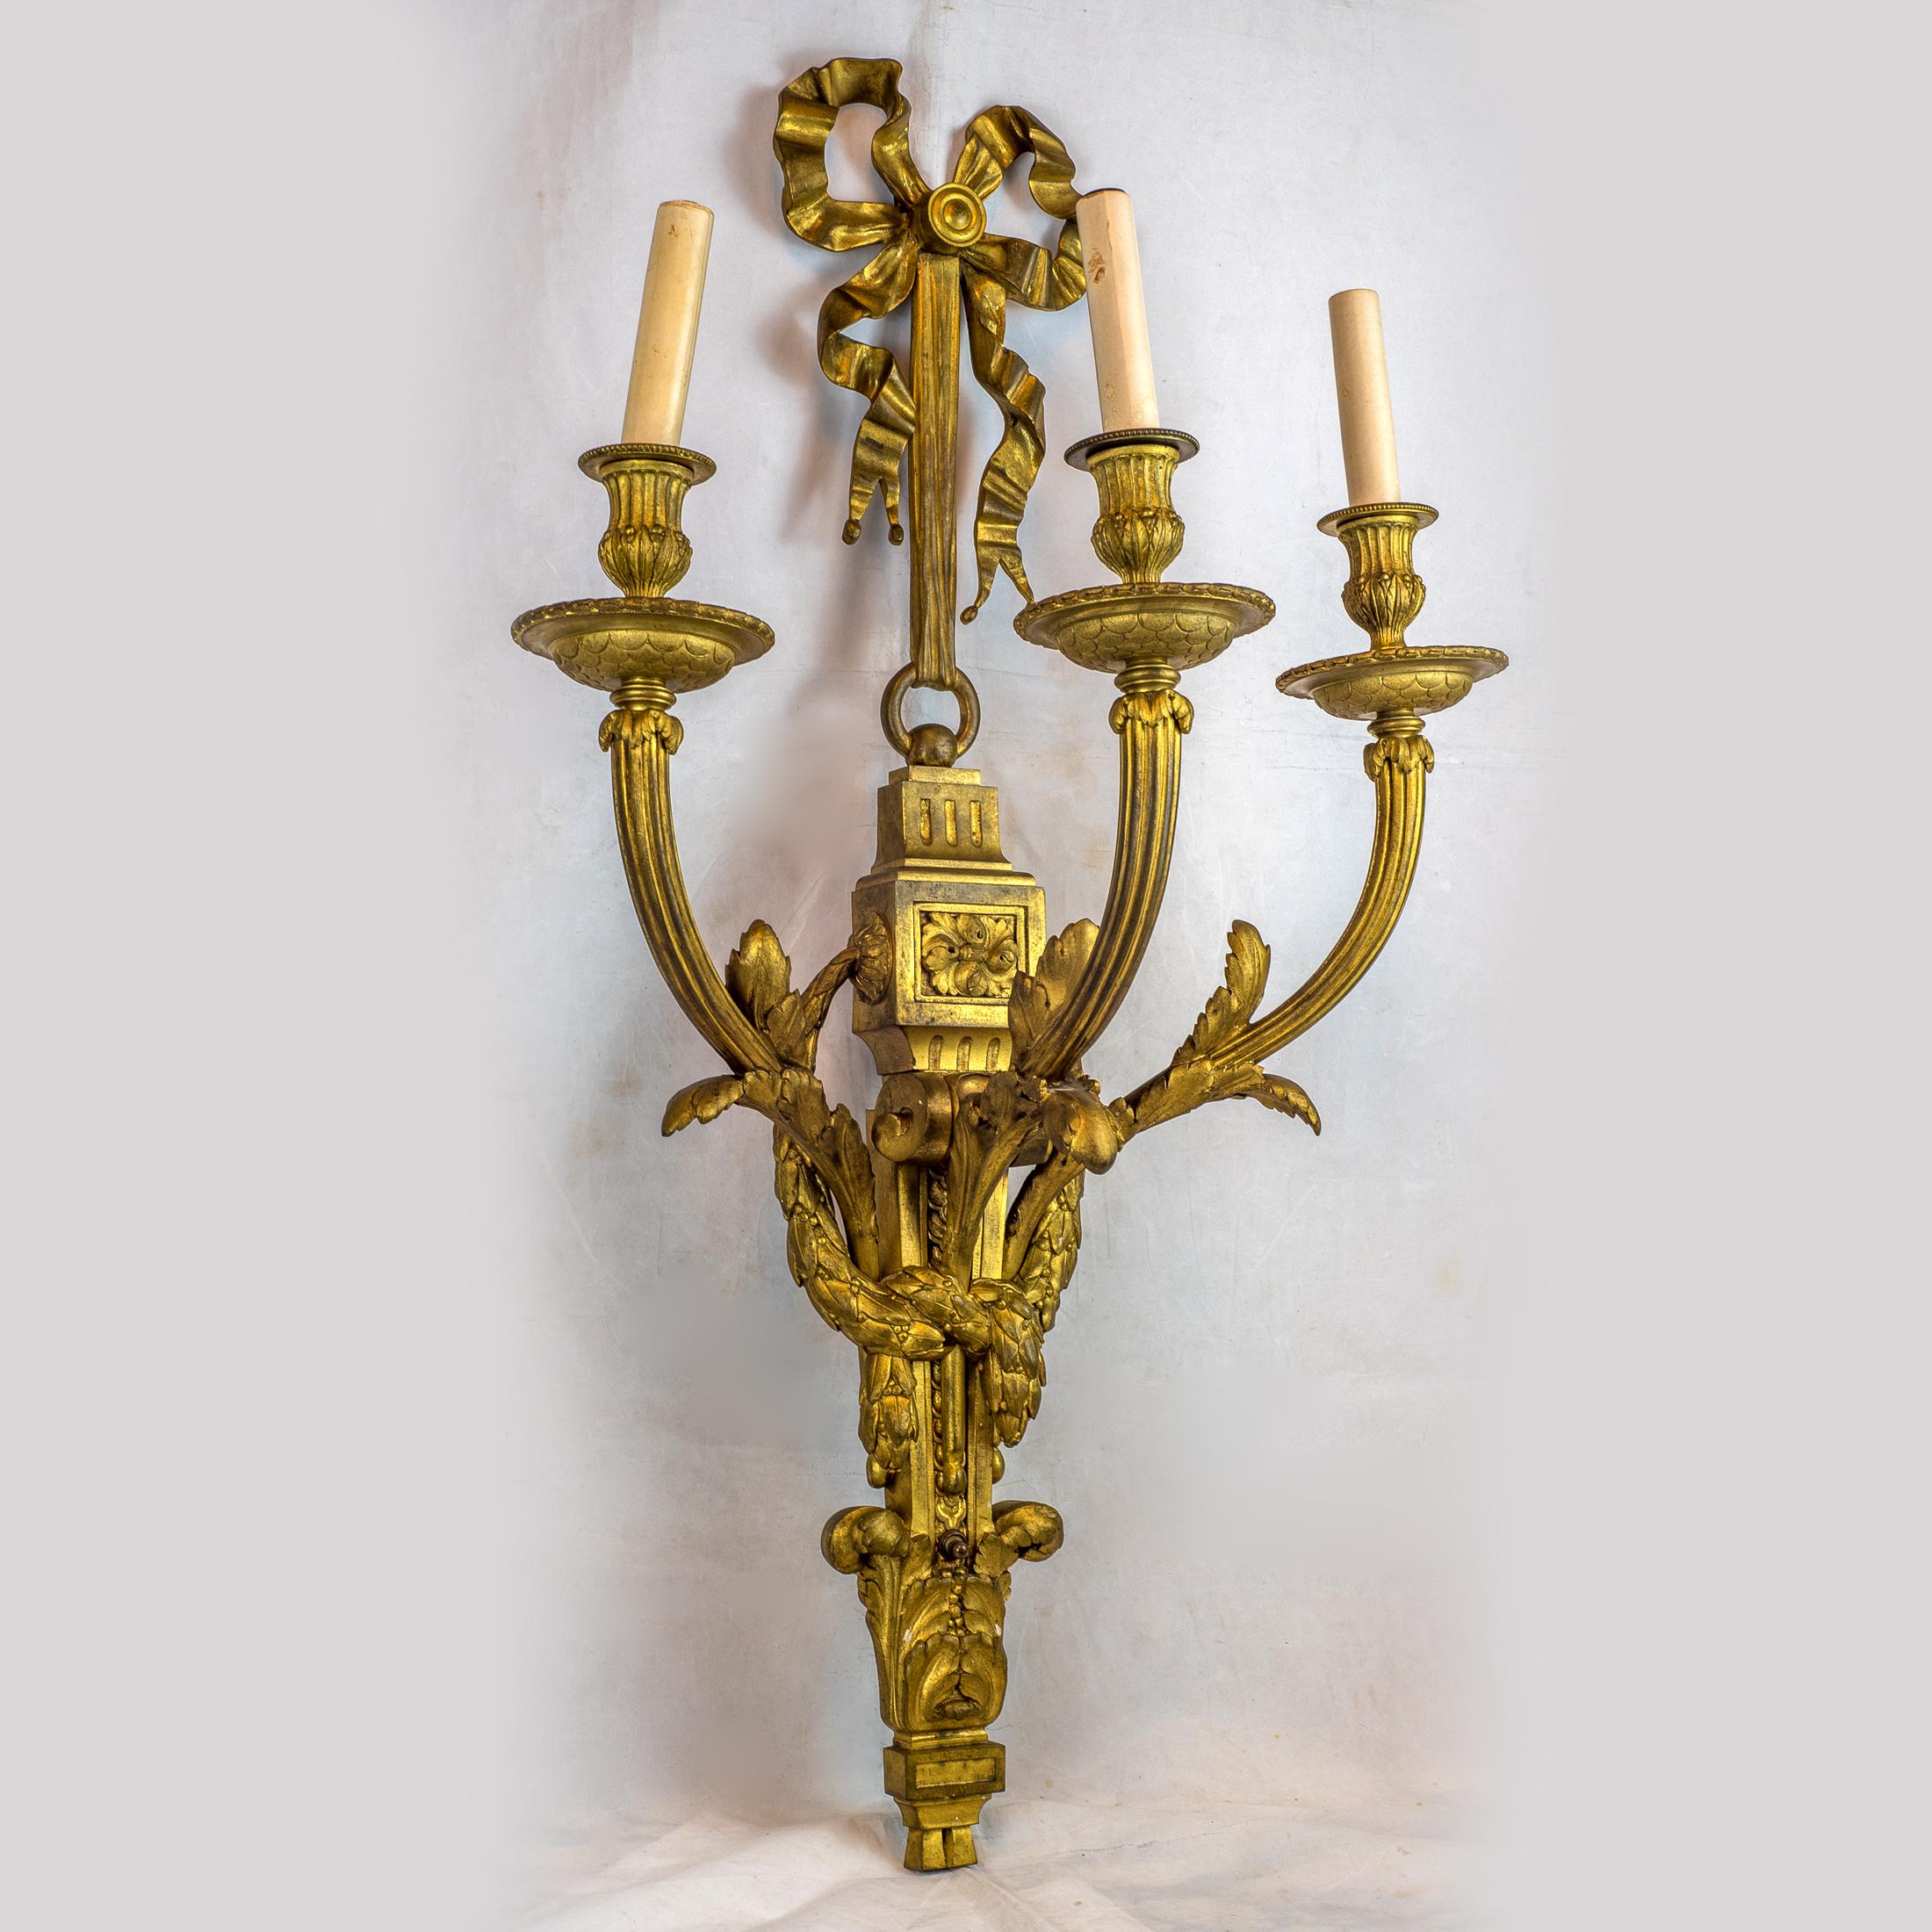 A Fine pair of gilt bronze Louis XVI style three-light wall light sconces
Origin: French
Date: Late 19th century
Dimension: (H) 31 1/4 in. x (W)17 1/2 in. x (D)10 1/2 in.